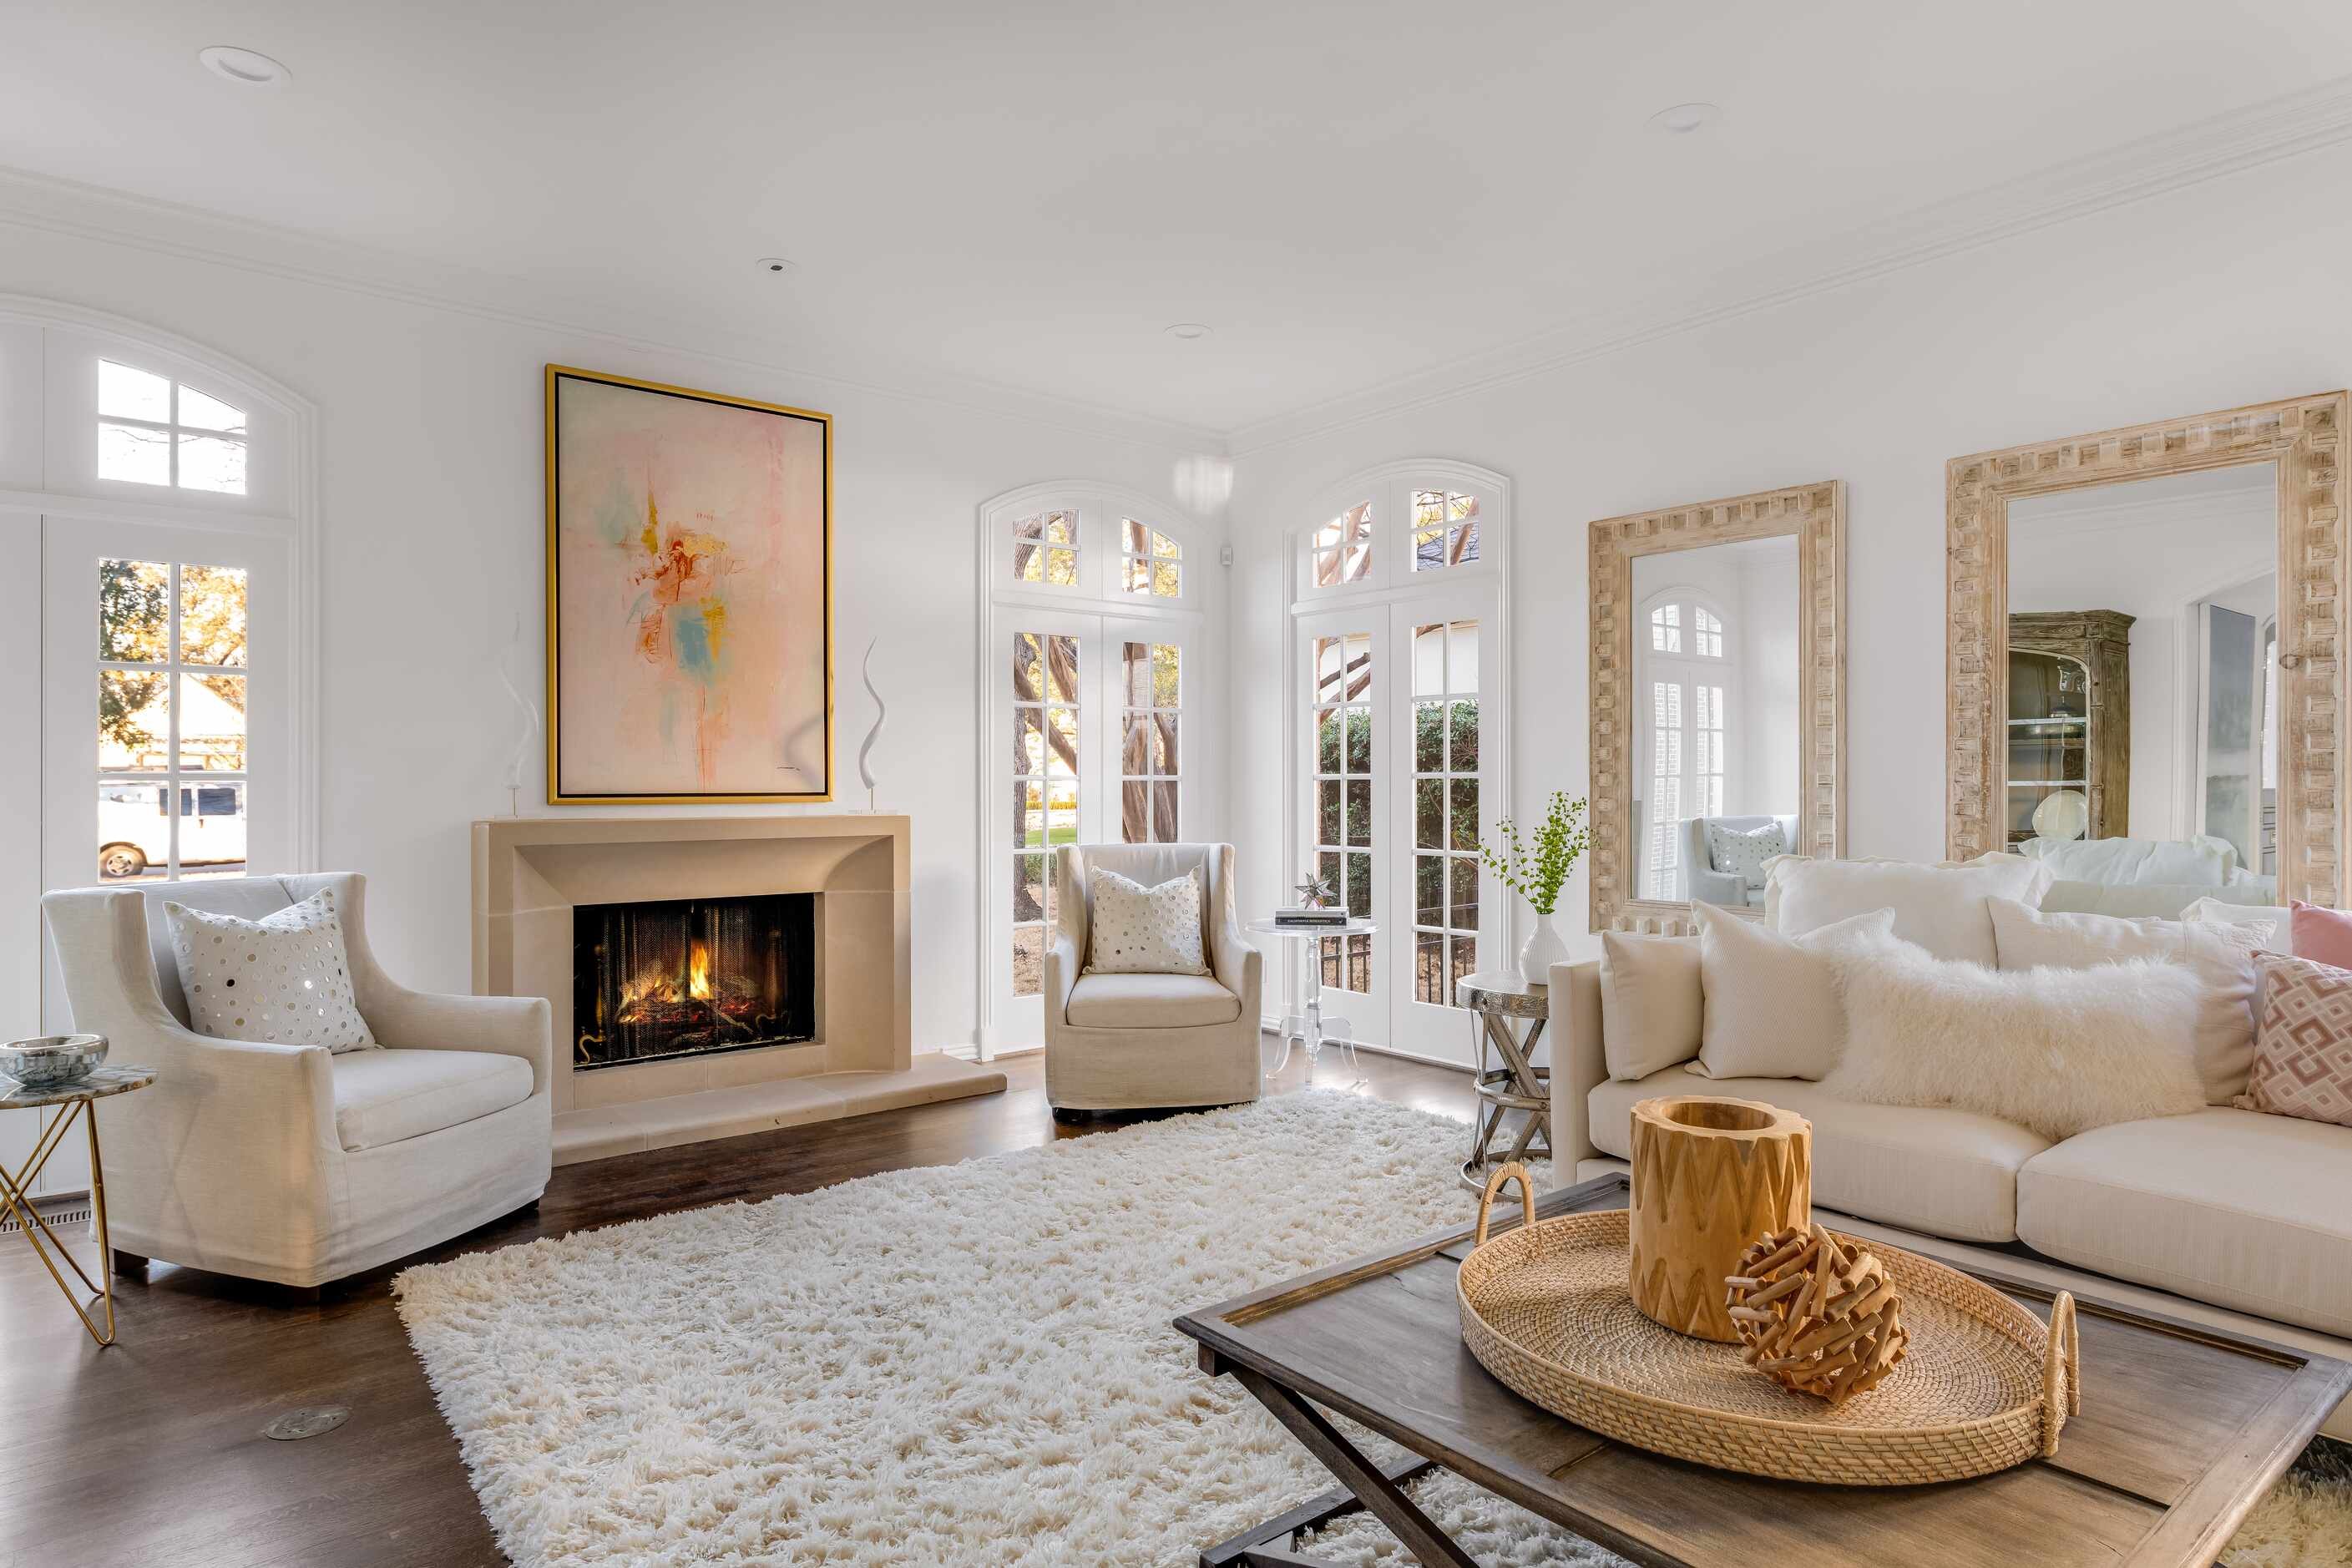 A living room faces a fireplace and has floor-to-ceiling French doors.